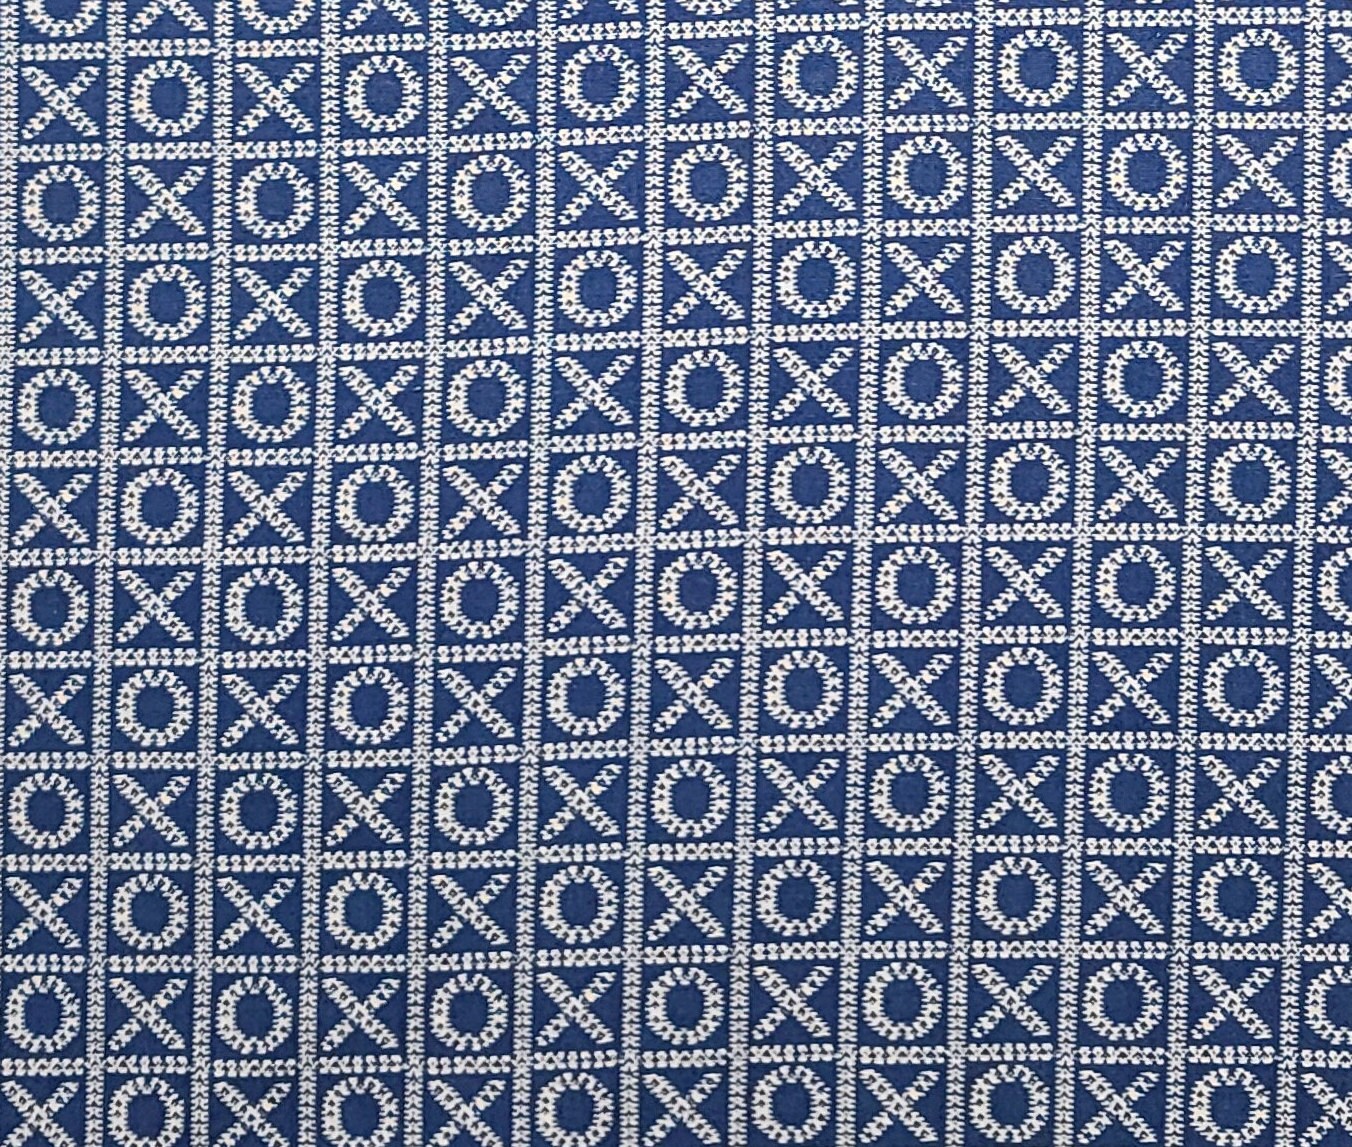 Blue and White "X" and "O" Block Print Fabric - Selvage to Selvage Print